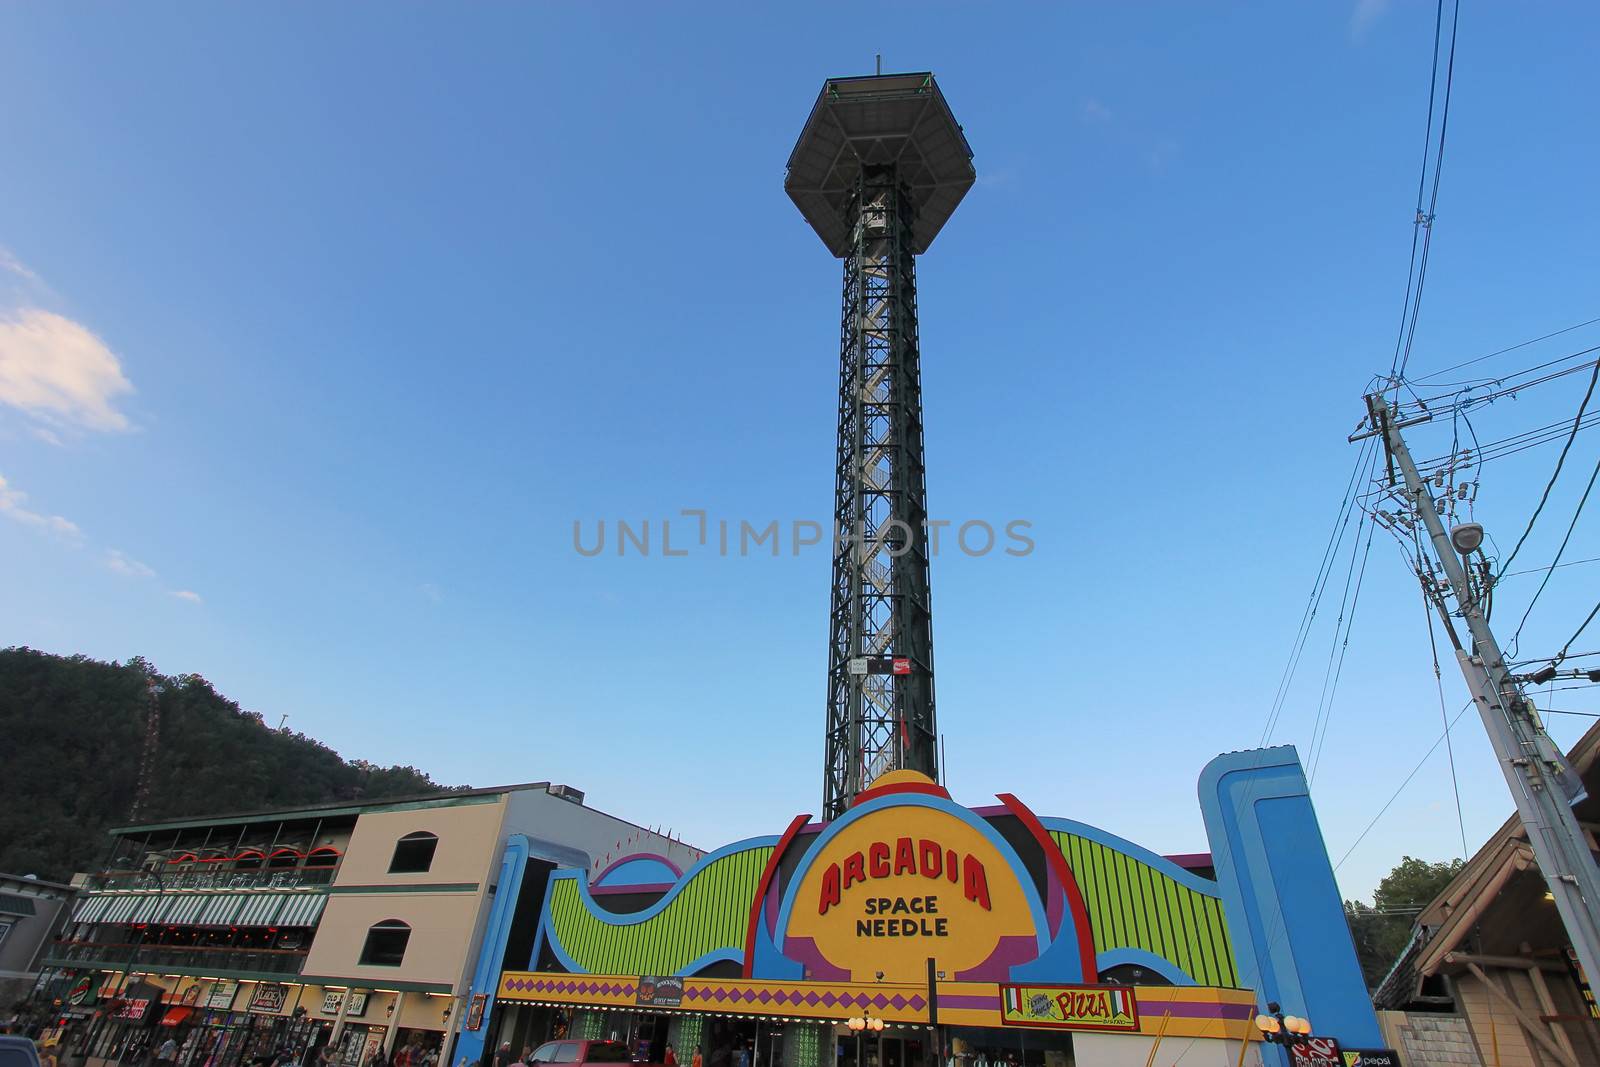 GATLINBURG, TENNESSEE - OCTOBER 5: Arcadia and Space Needle in Gatlinburg, Tennessee, October 5, 2013. Gatlinburg is a major tourist destination and gateway to the Great Smoky Mountains National Park.